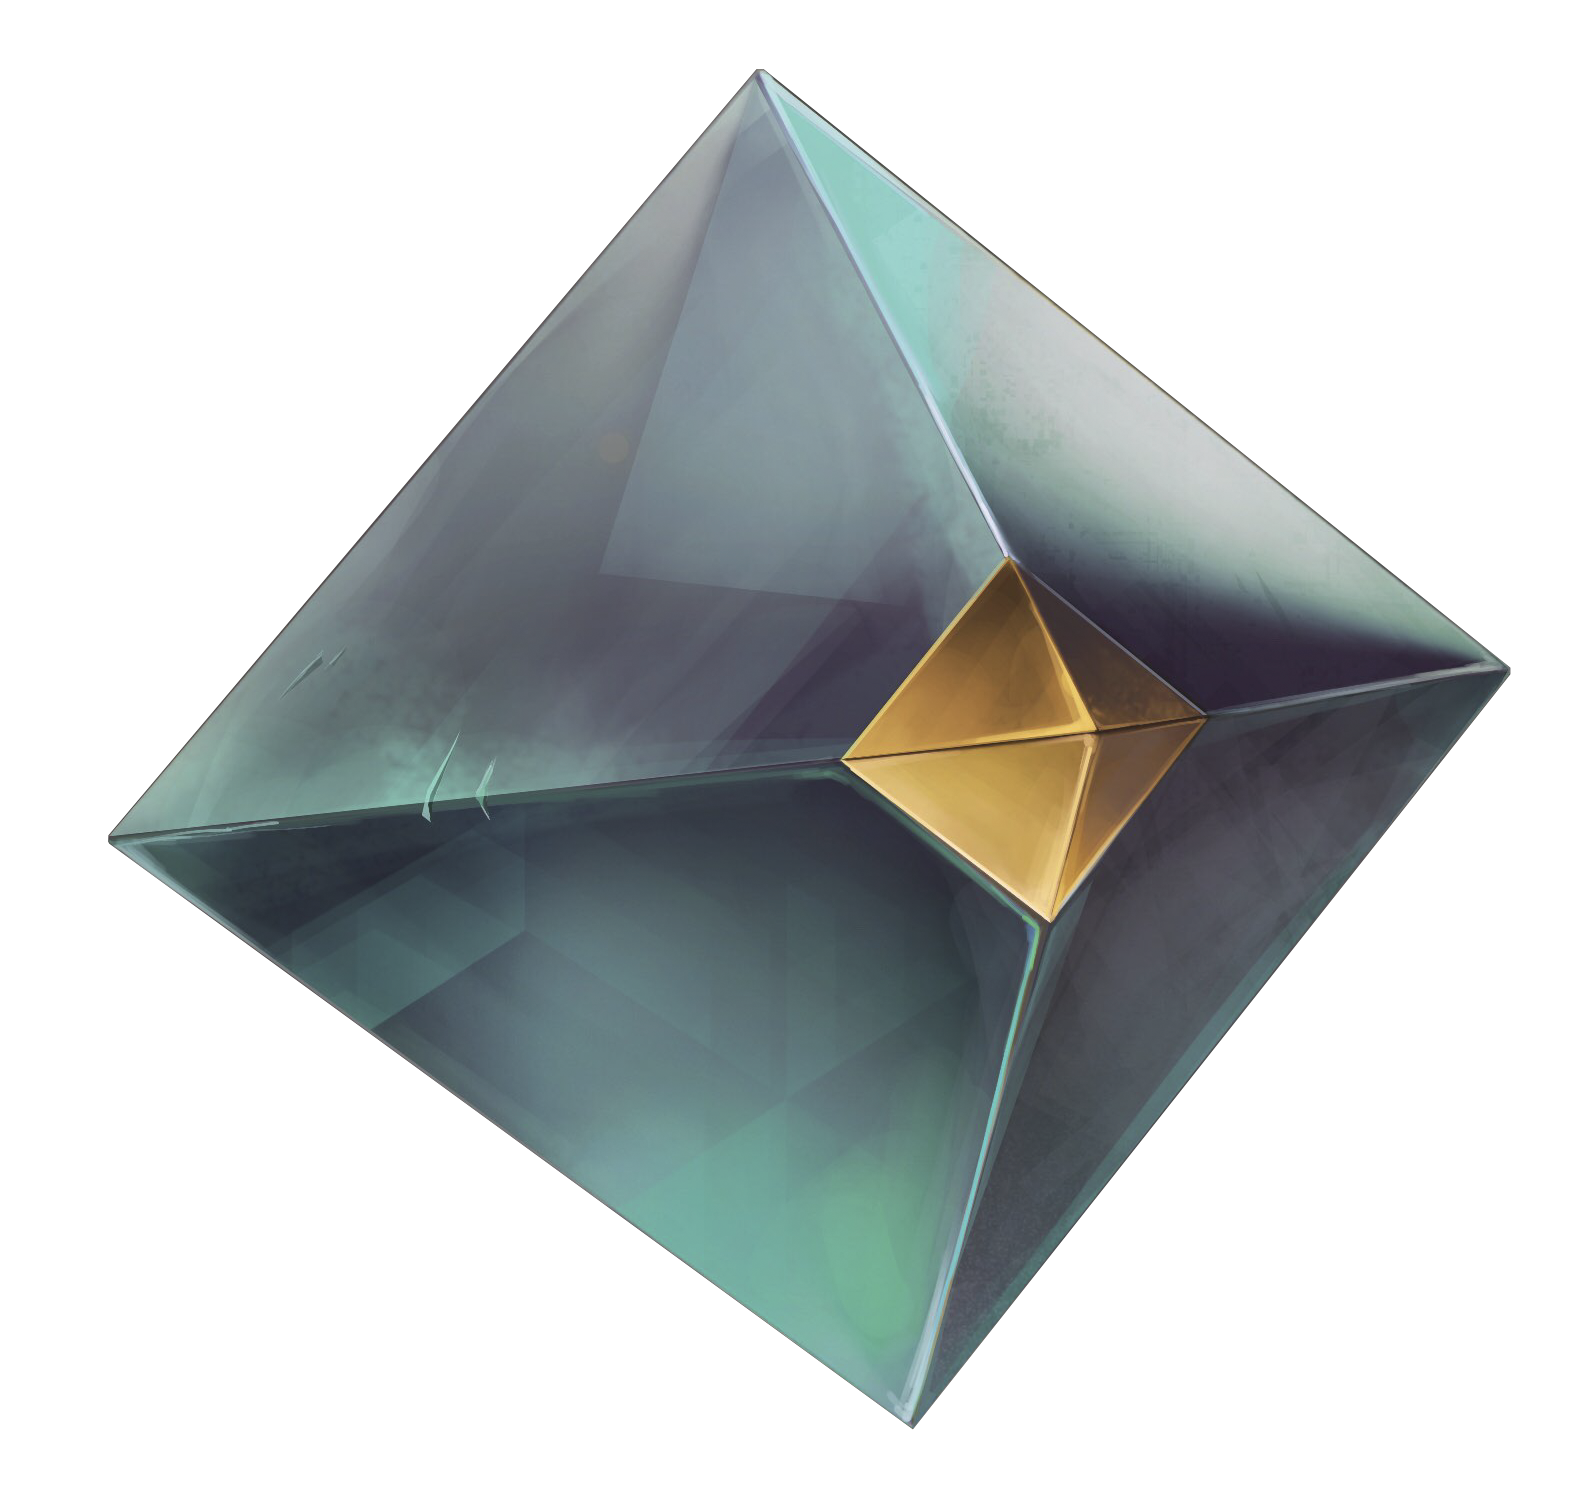 The Prism